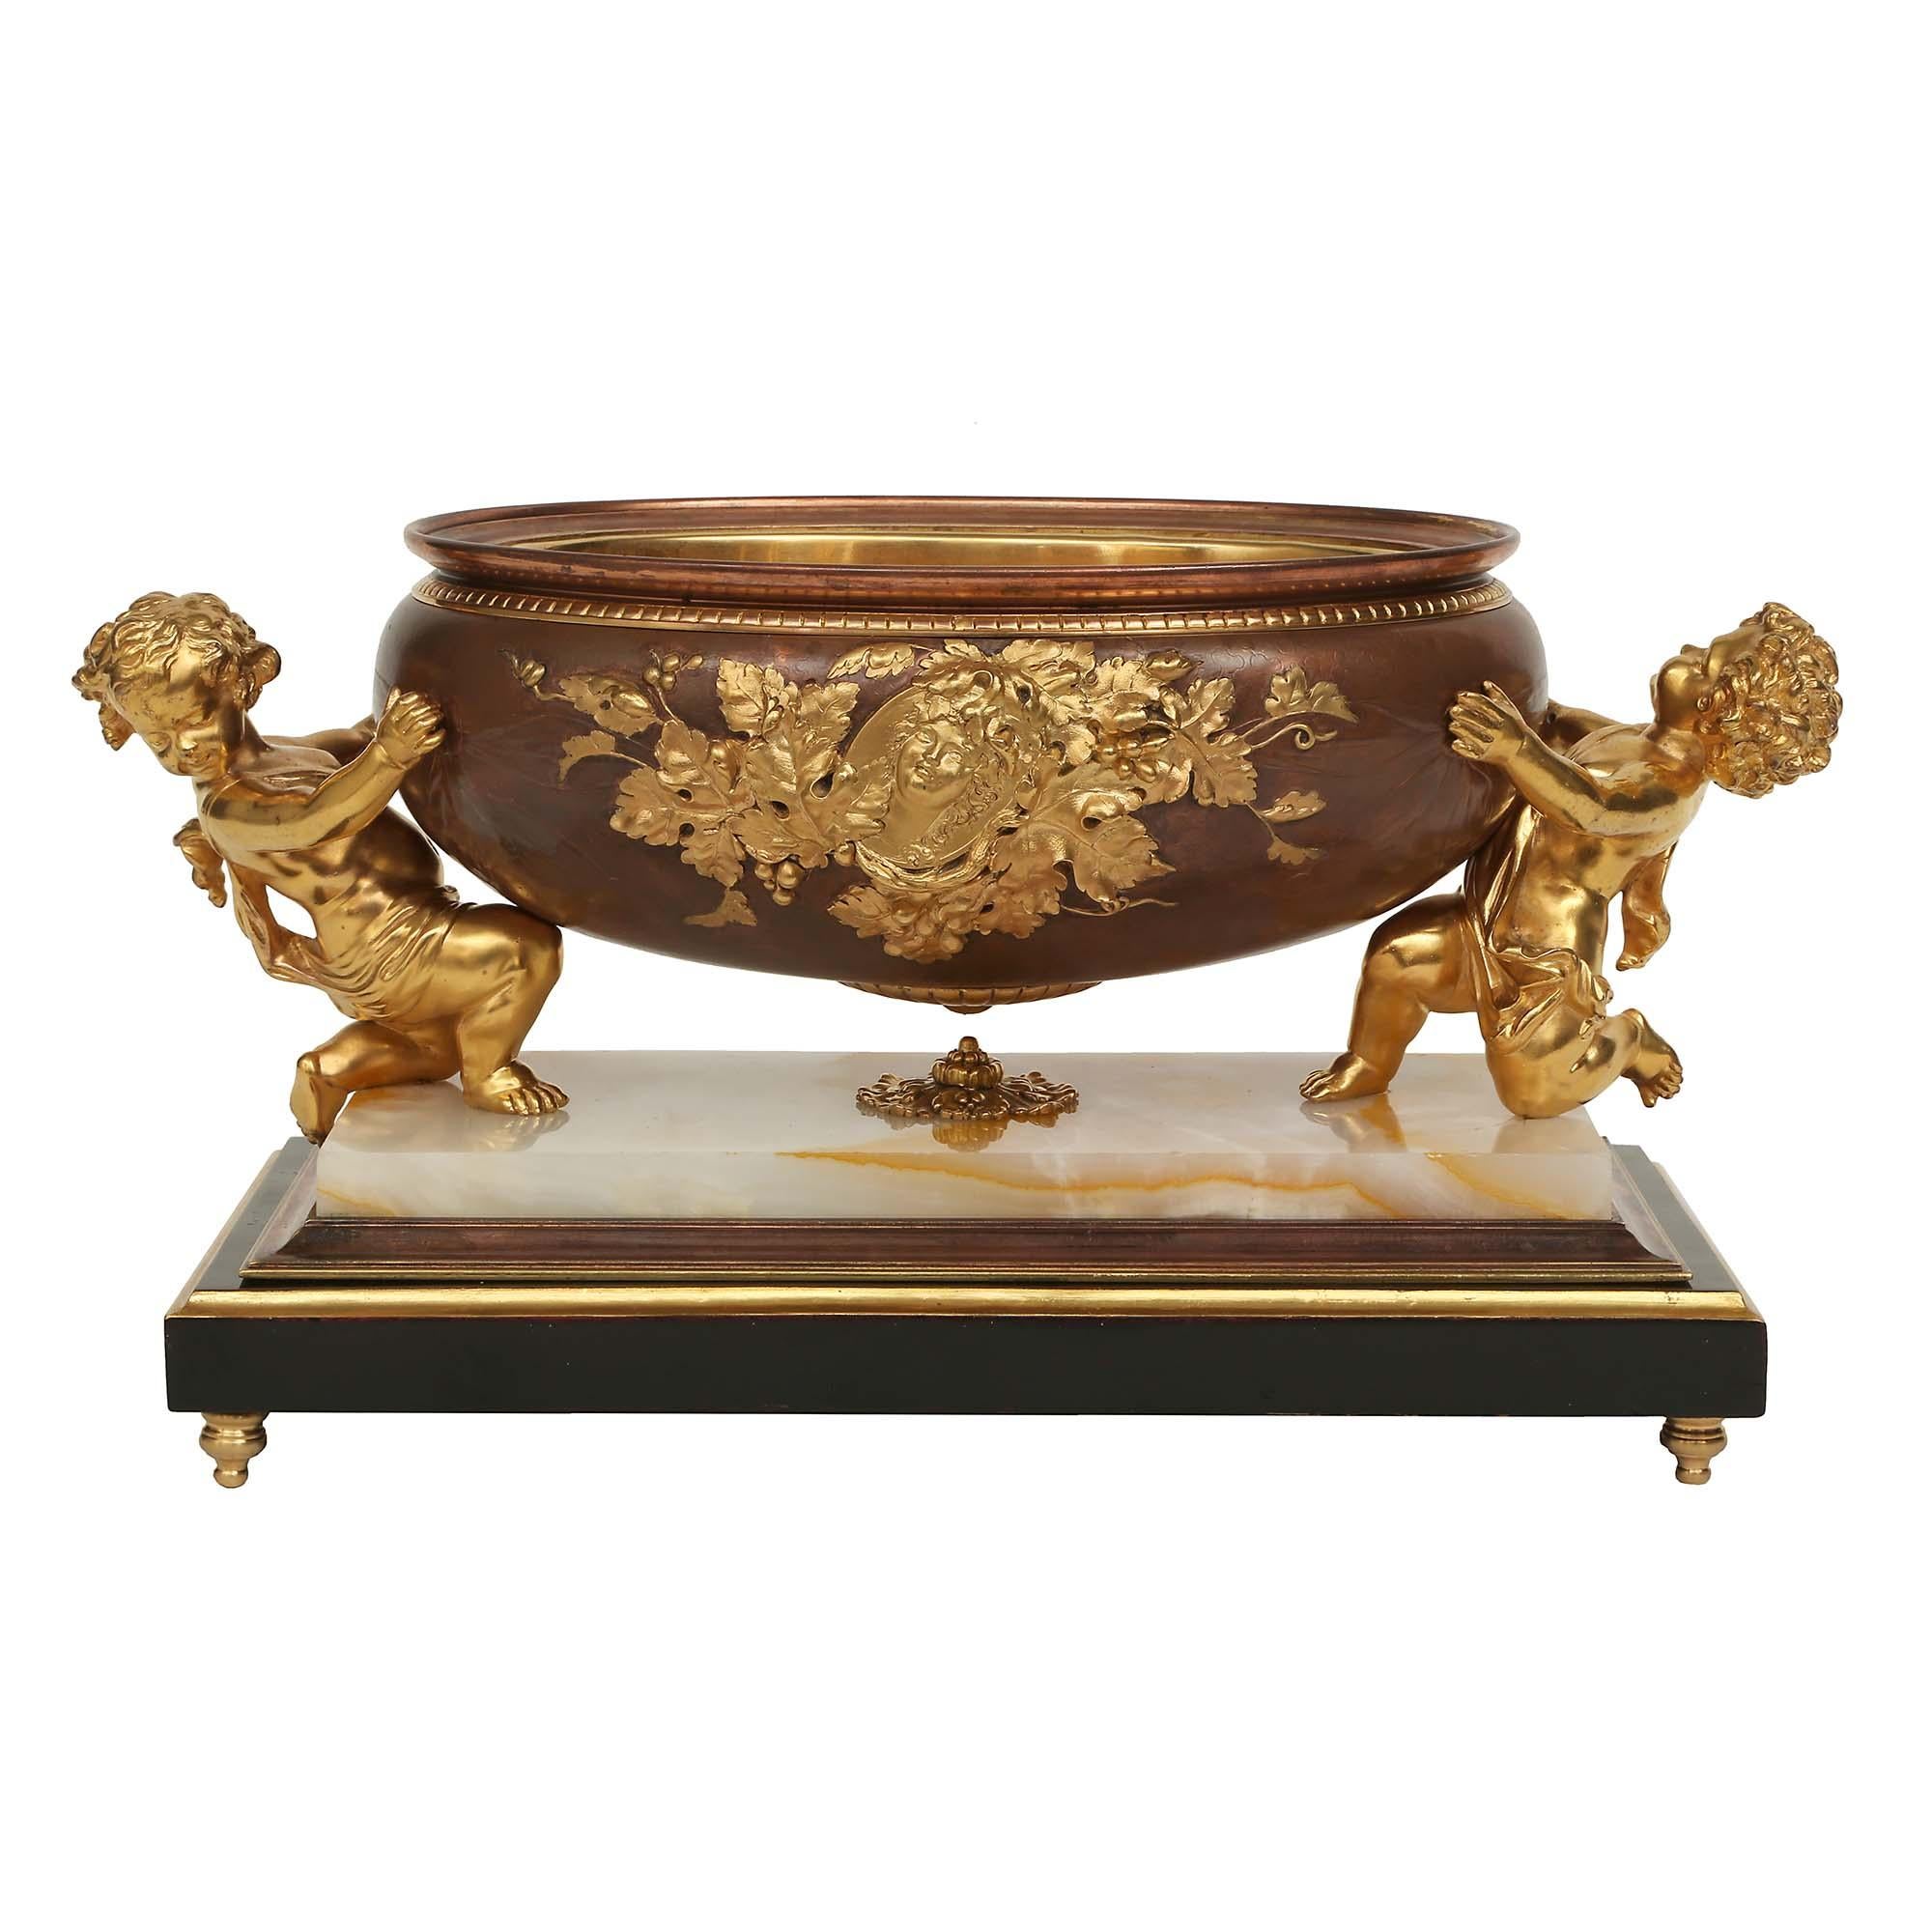 A charming and high quality French 19th century Louis XVI st. ebonized Fruitwood, onyx, patinated bronze and ormolu centerpiece bowl. The centerpiece is raised by four most elegant topie shaped feet below a rectangular ebonized fruitwood base with a